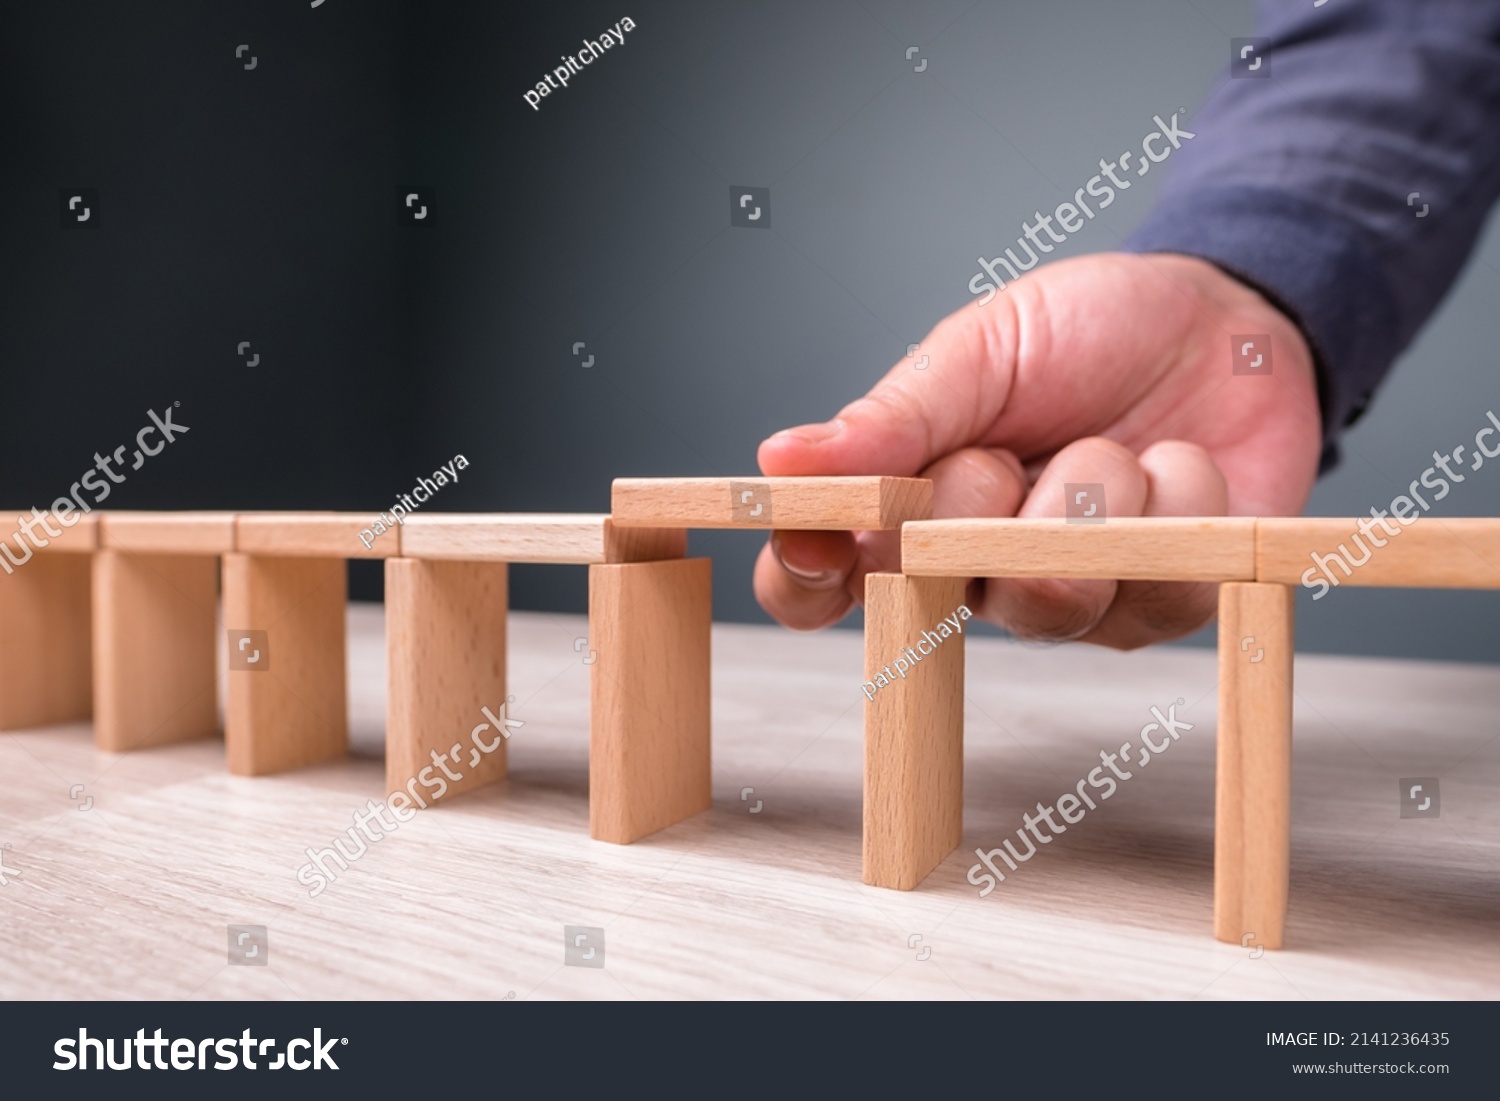 Hand build a toy bridge by wooden blocks and going to add the final piece between the gap to complete, concept of help solution, solve the disconnect problem #2141236435